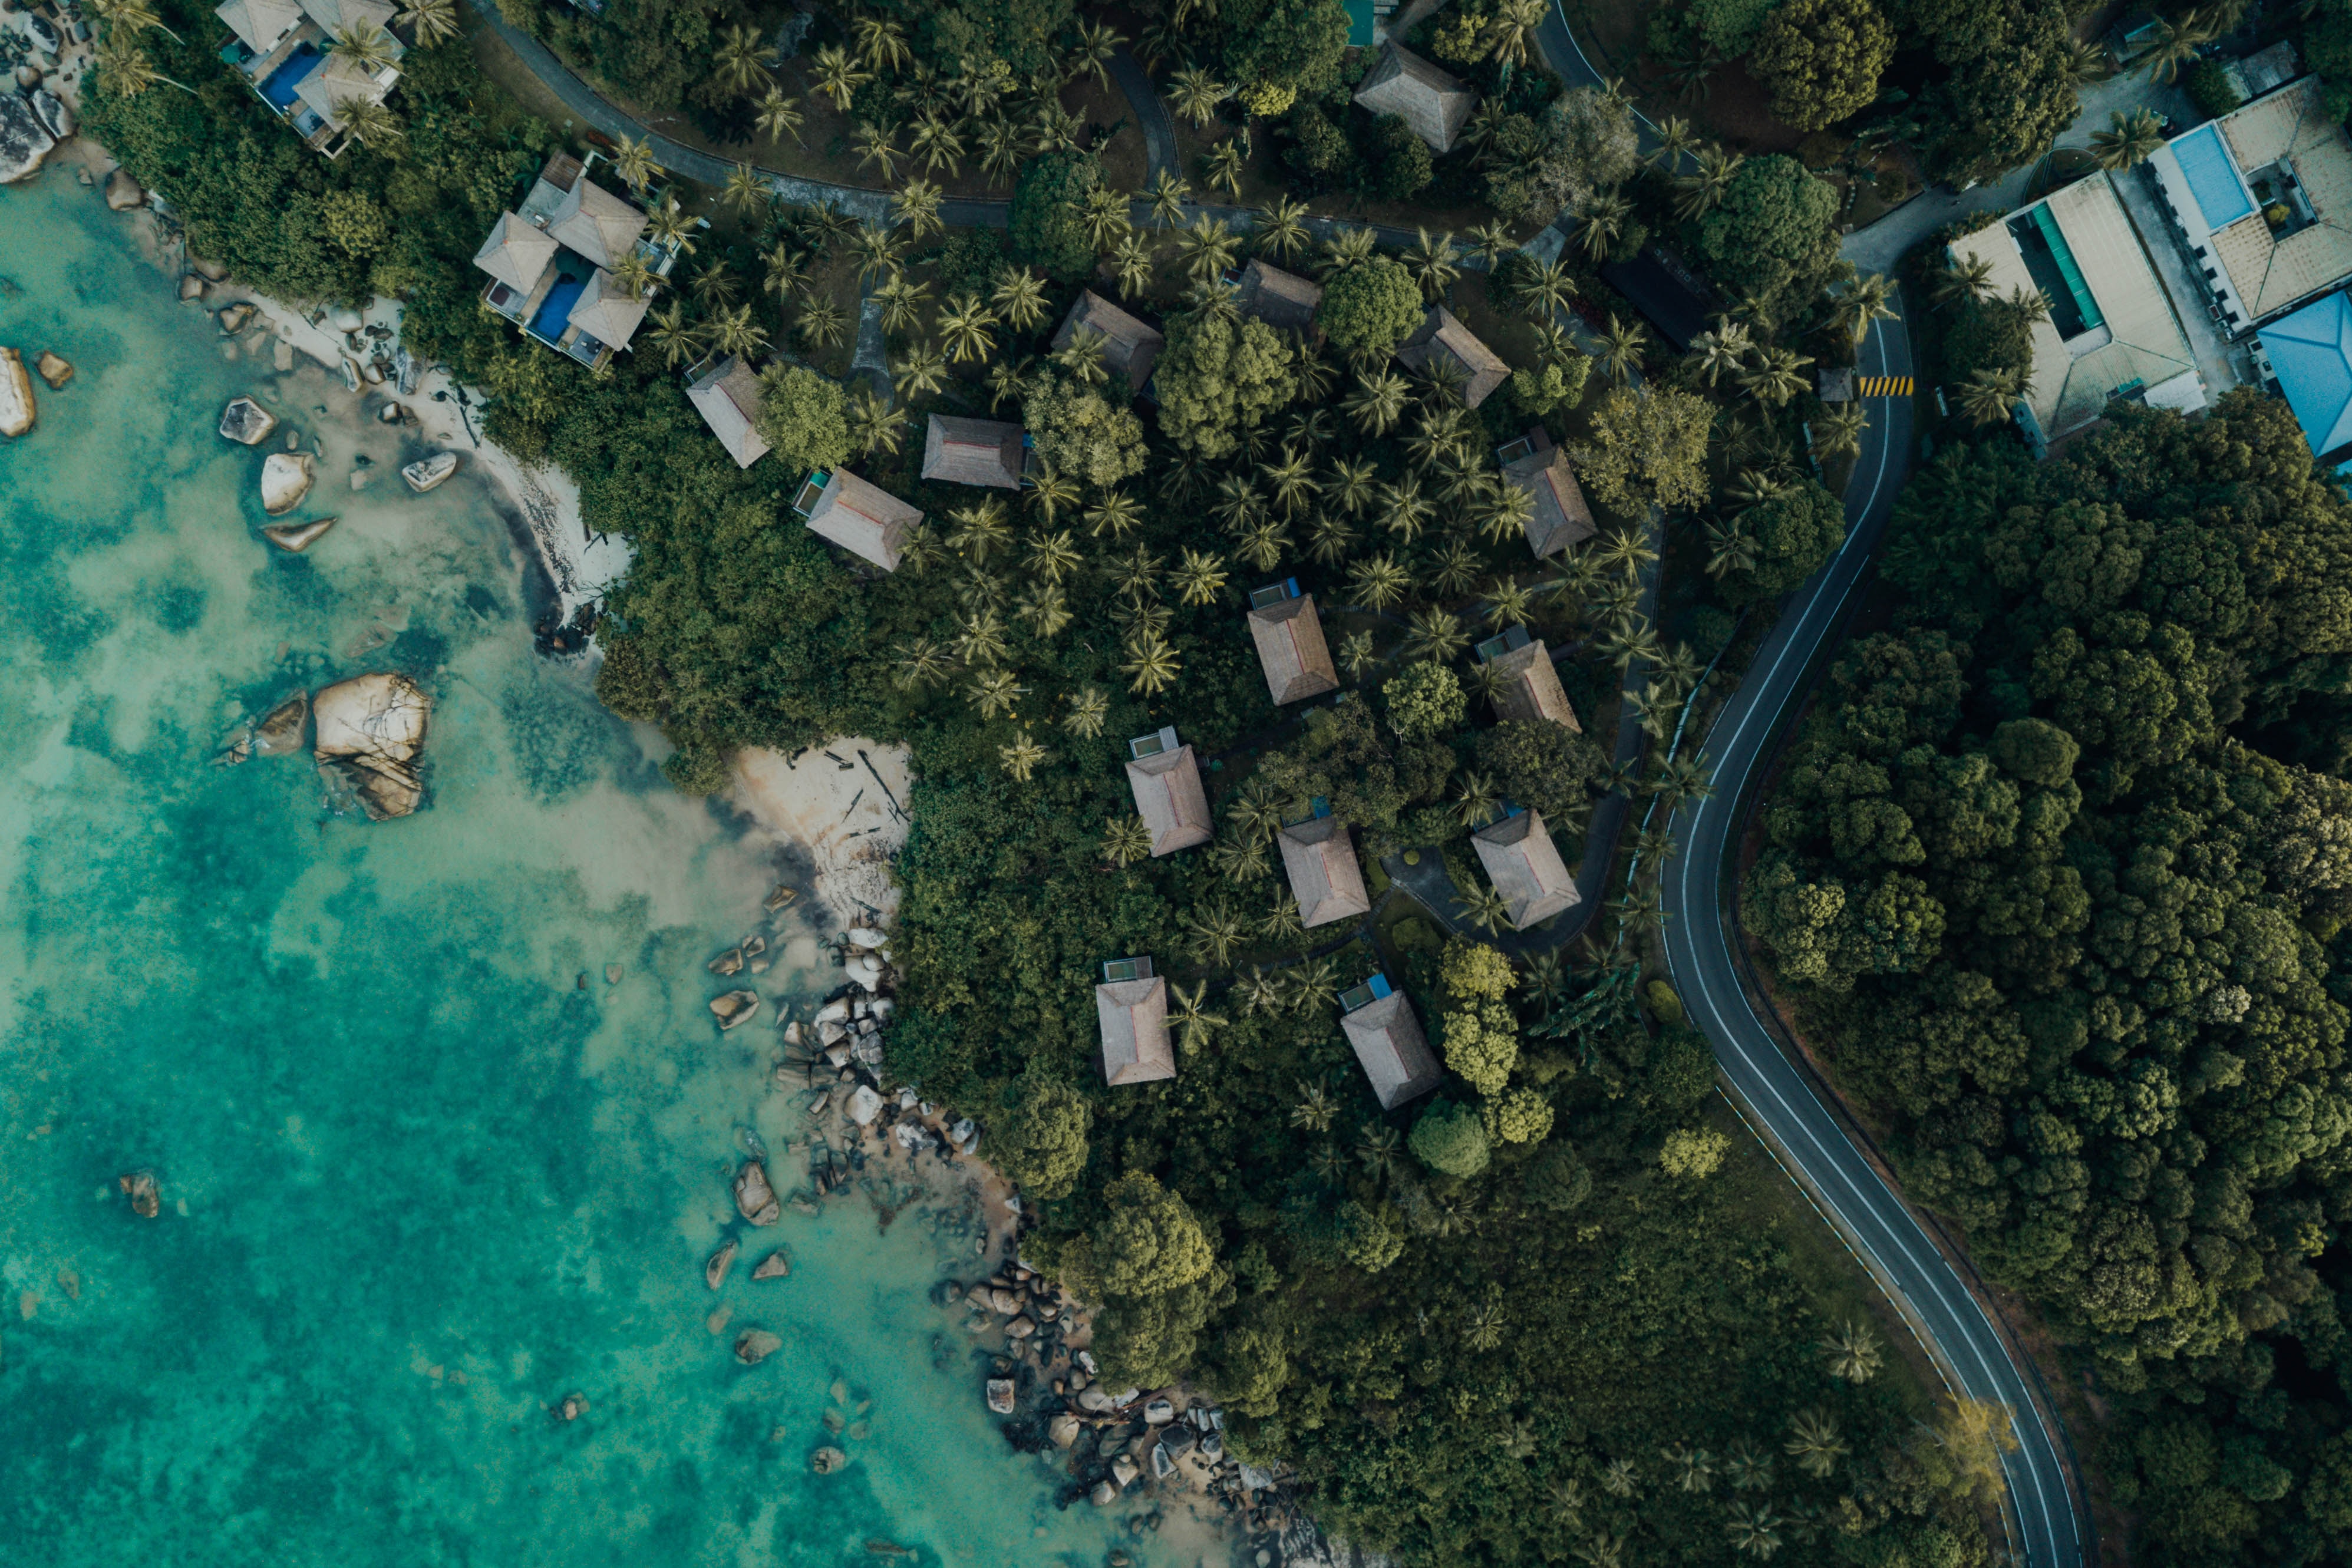 vertical wallpaper view from above, nature, trees, sea, building, shore, bank